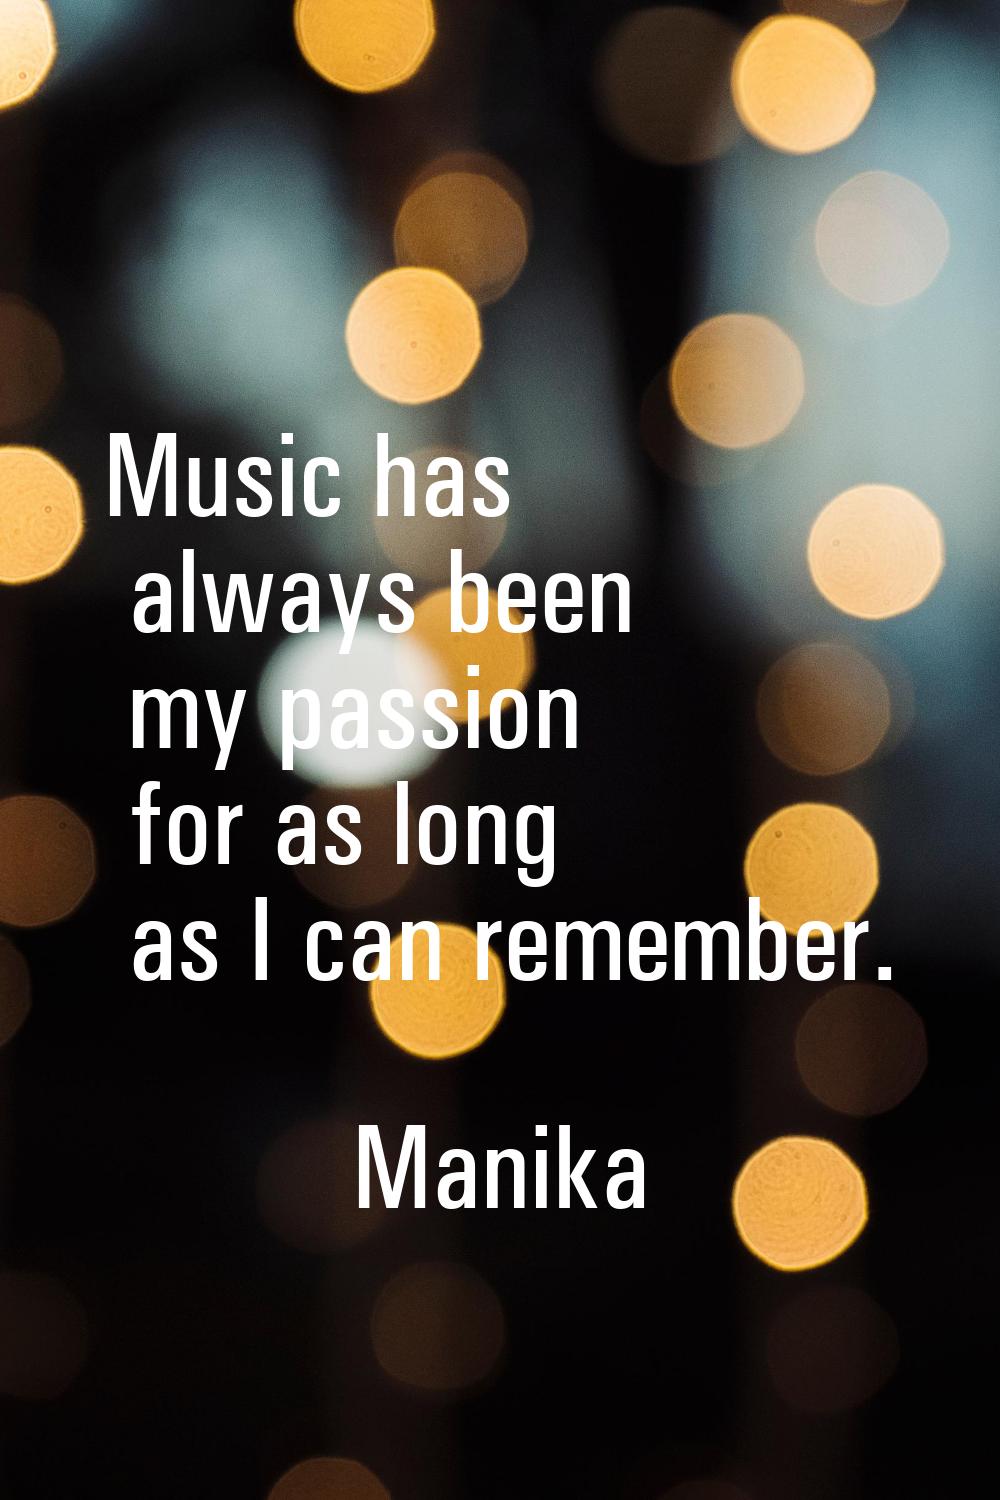 Music has always been my passion for as long as I can remember.